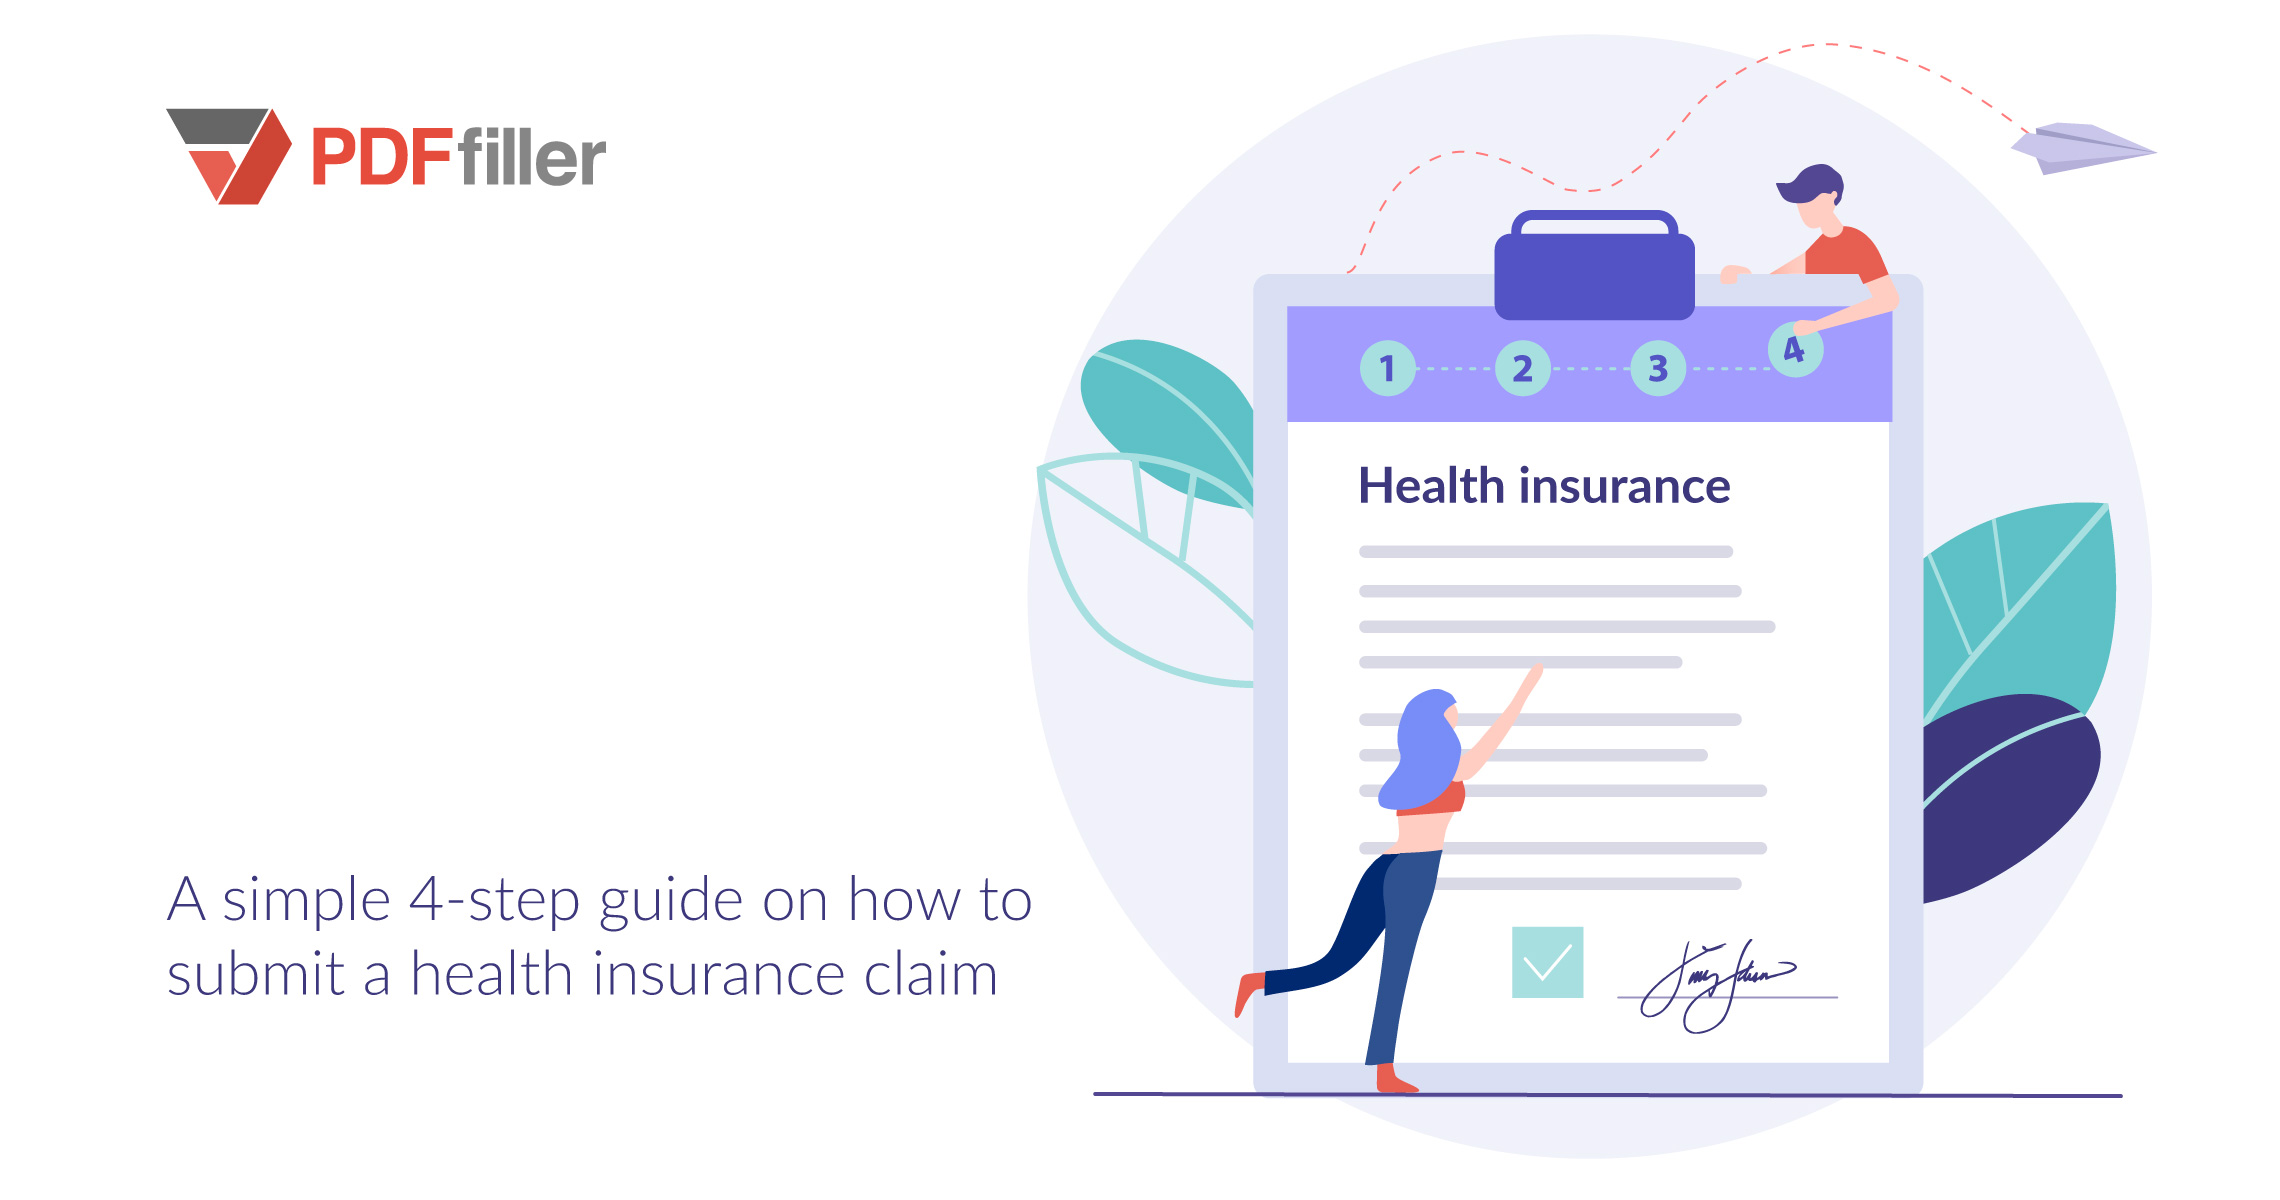 health insurance, digital workflow, how to choose insurance policy, submit insurance claim online, PDFfiller